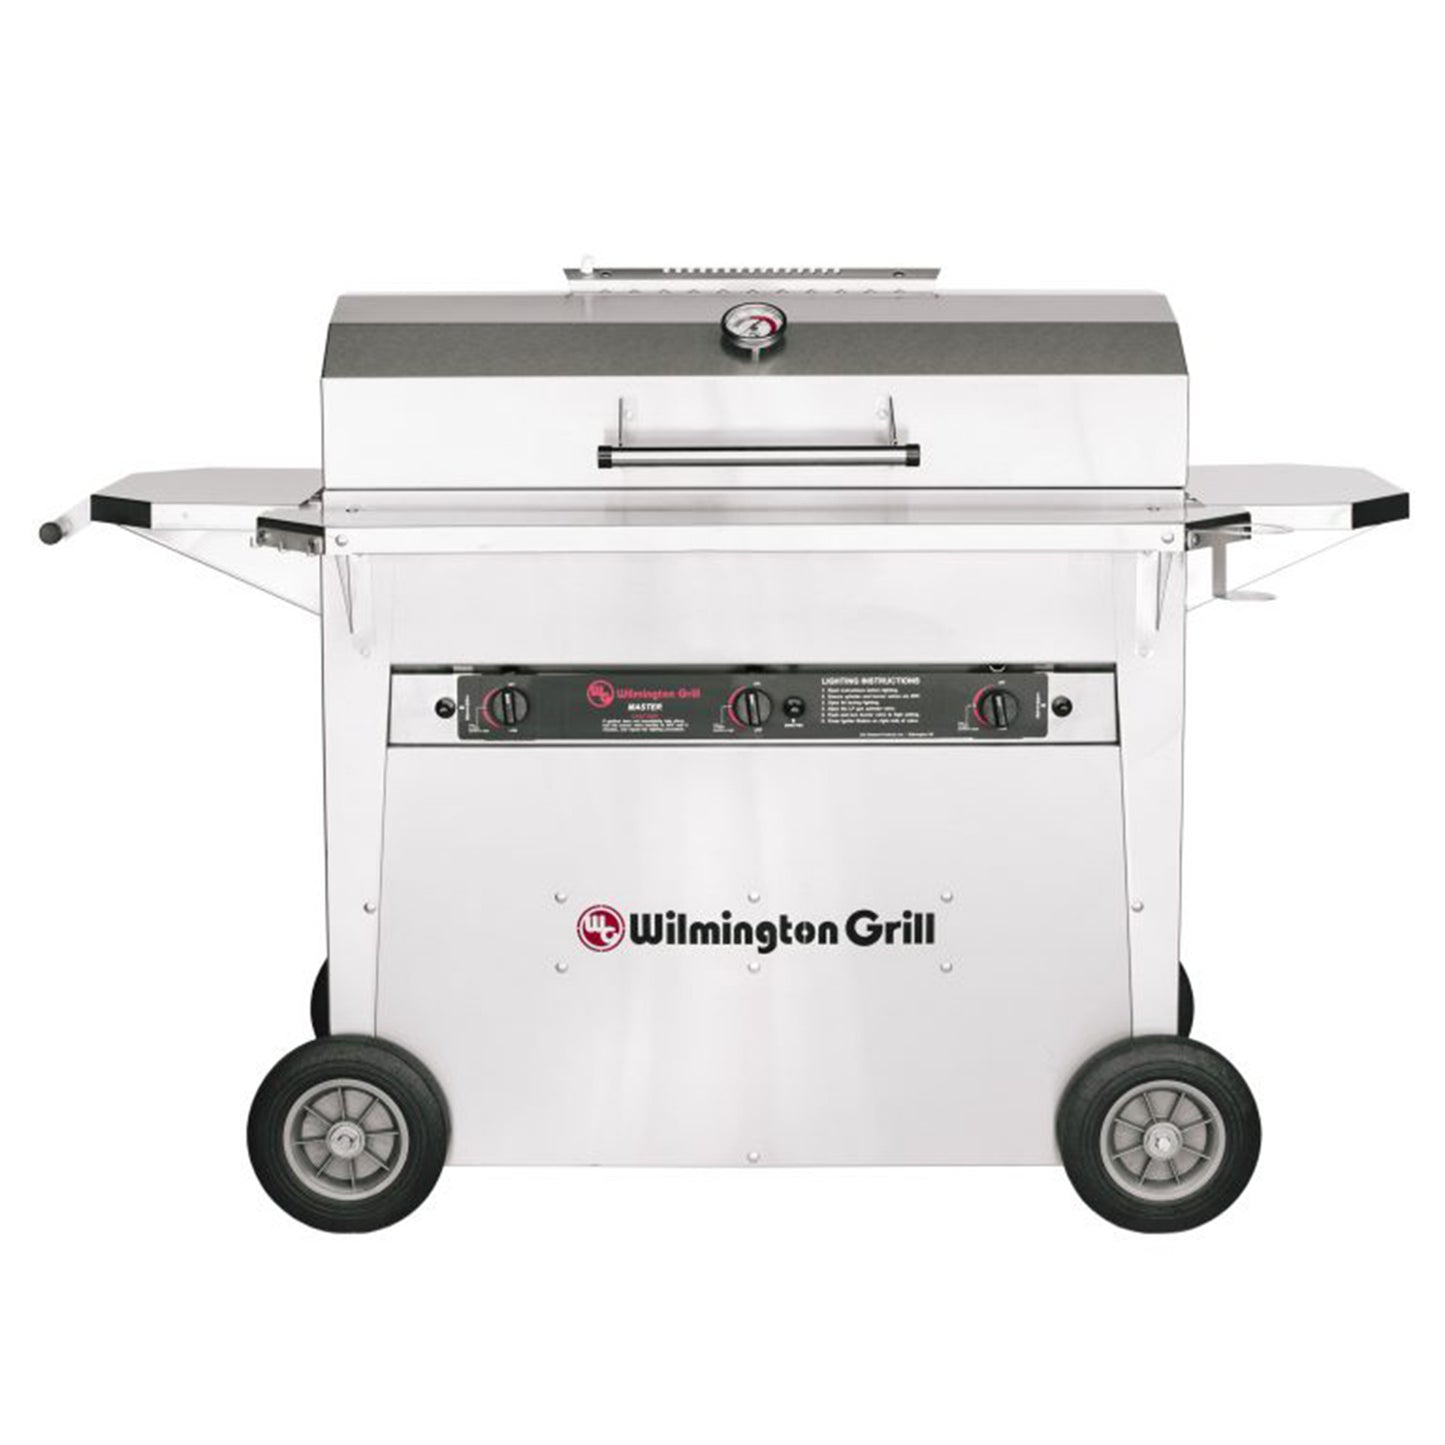 Wilmington Grill Master Gas Grill